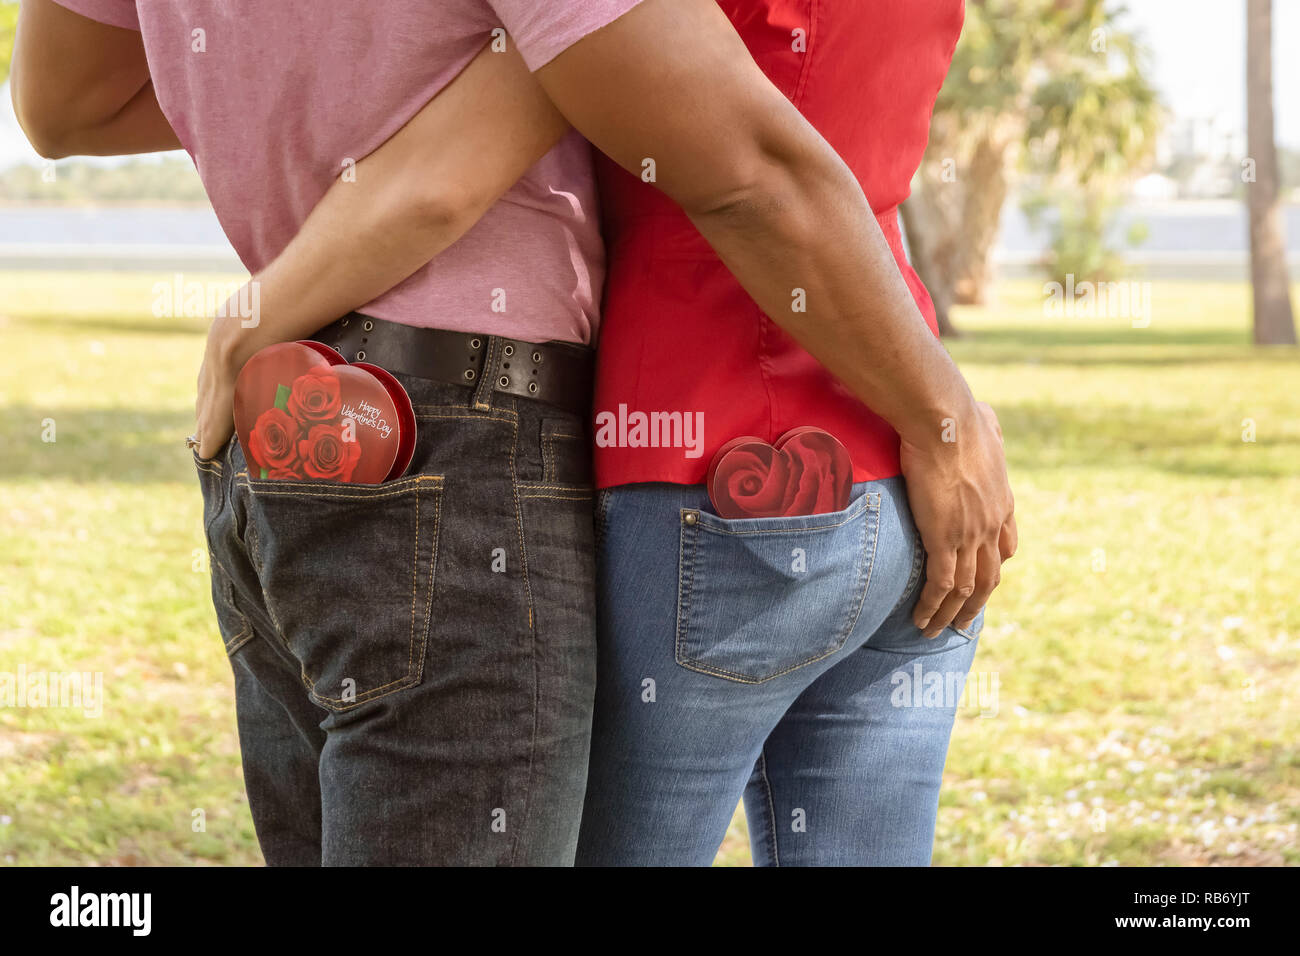 They hold each other's backside with chocolate hearts boxed candy in the opposite pocket. Stock Photo